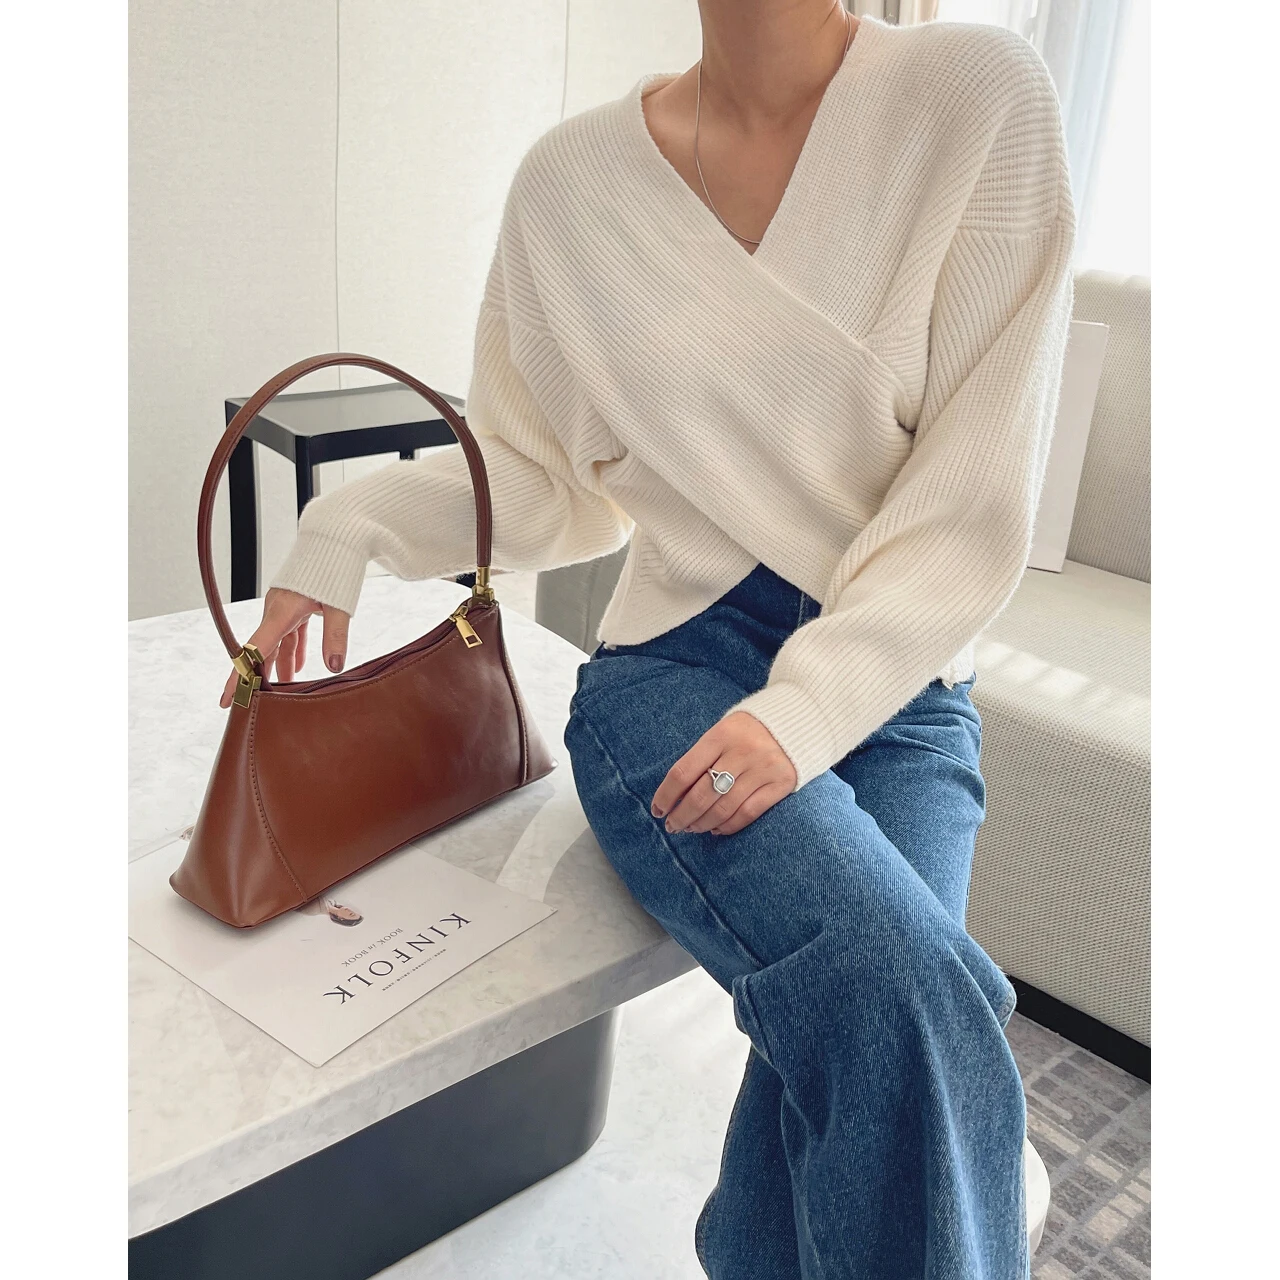 

2023 Woman Clothes Wrap Knit Sweaters Pulls Tops Korean Style Evening Winter Long Sleeve Sweatshirt Shirts Blouses Sexy Party